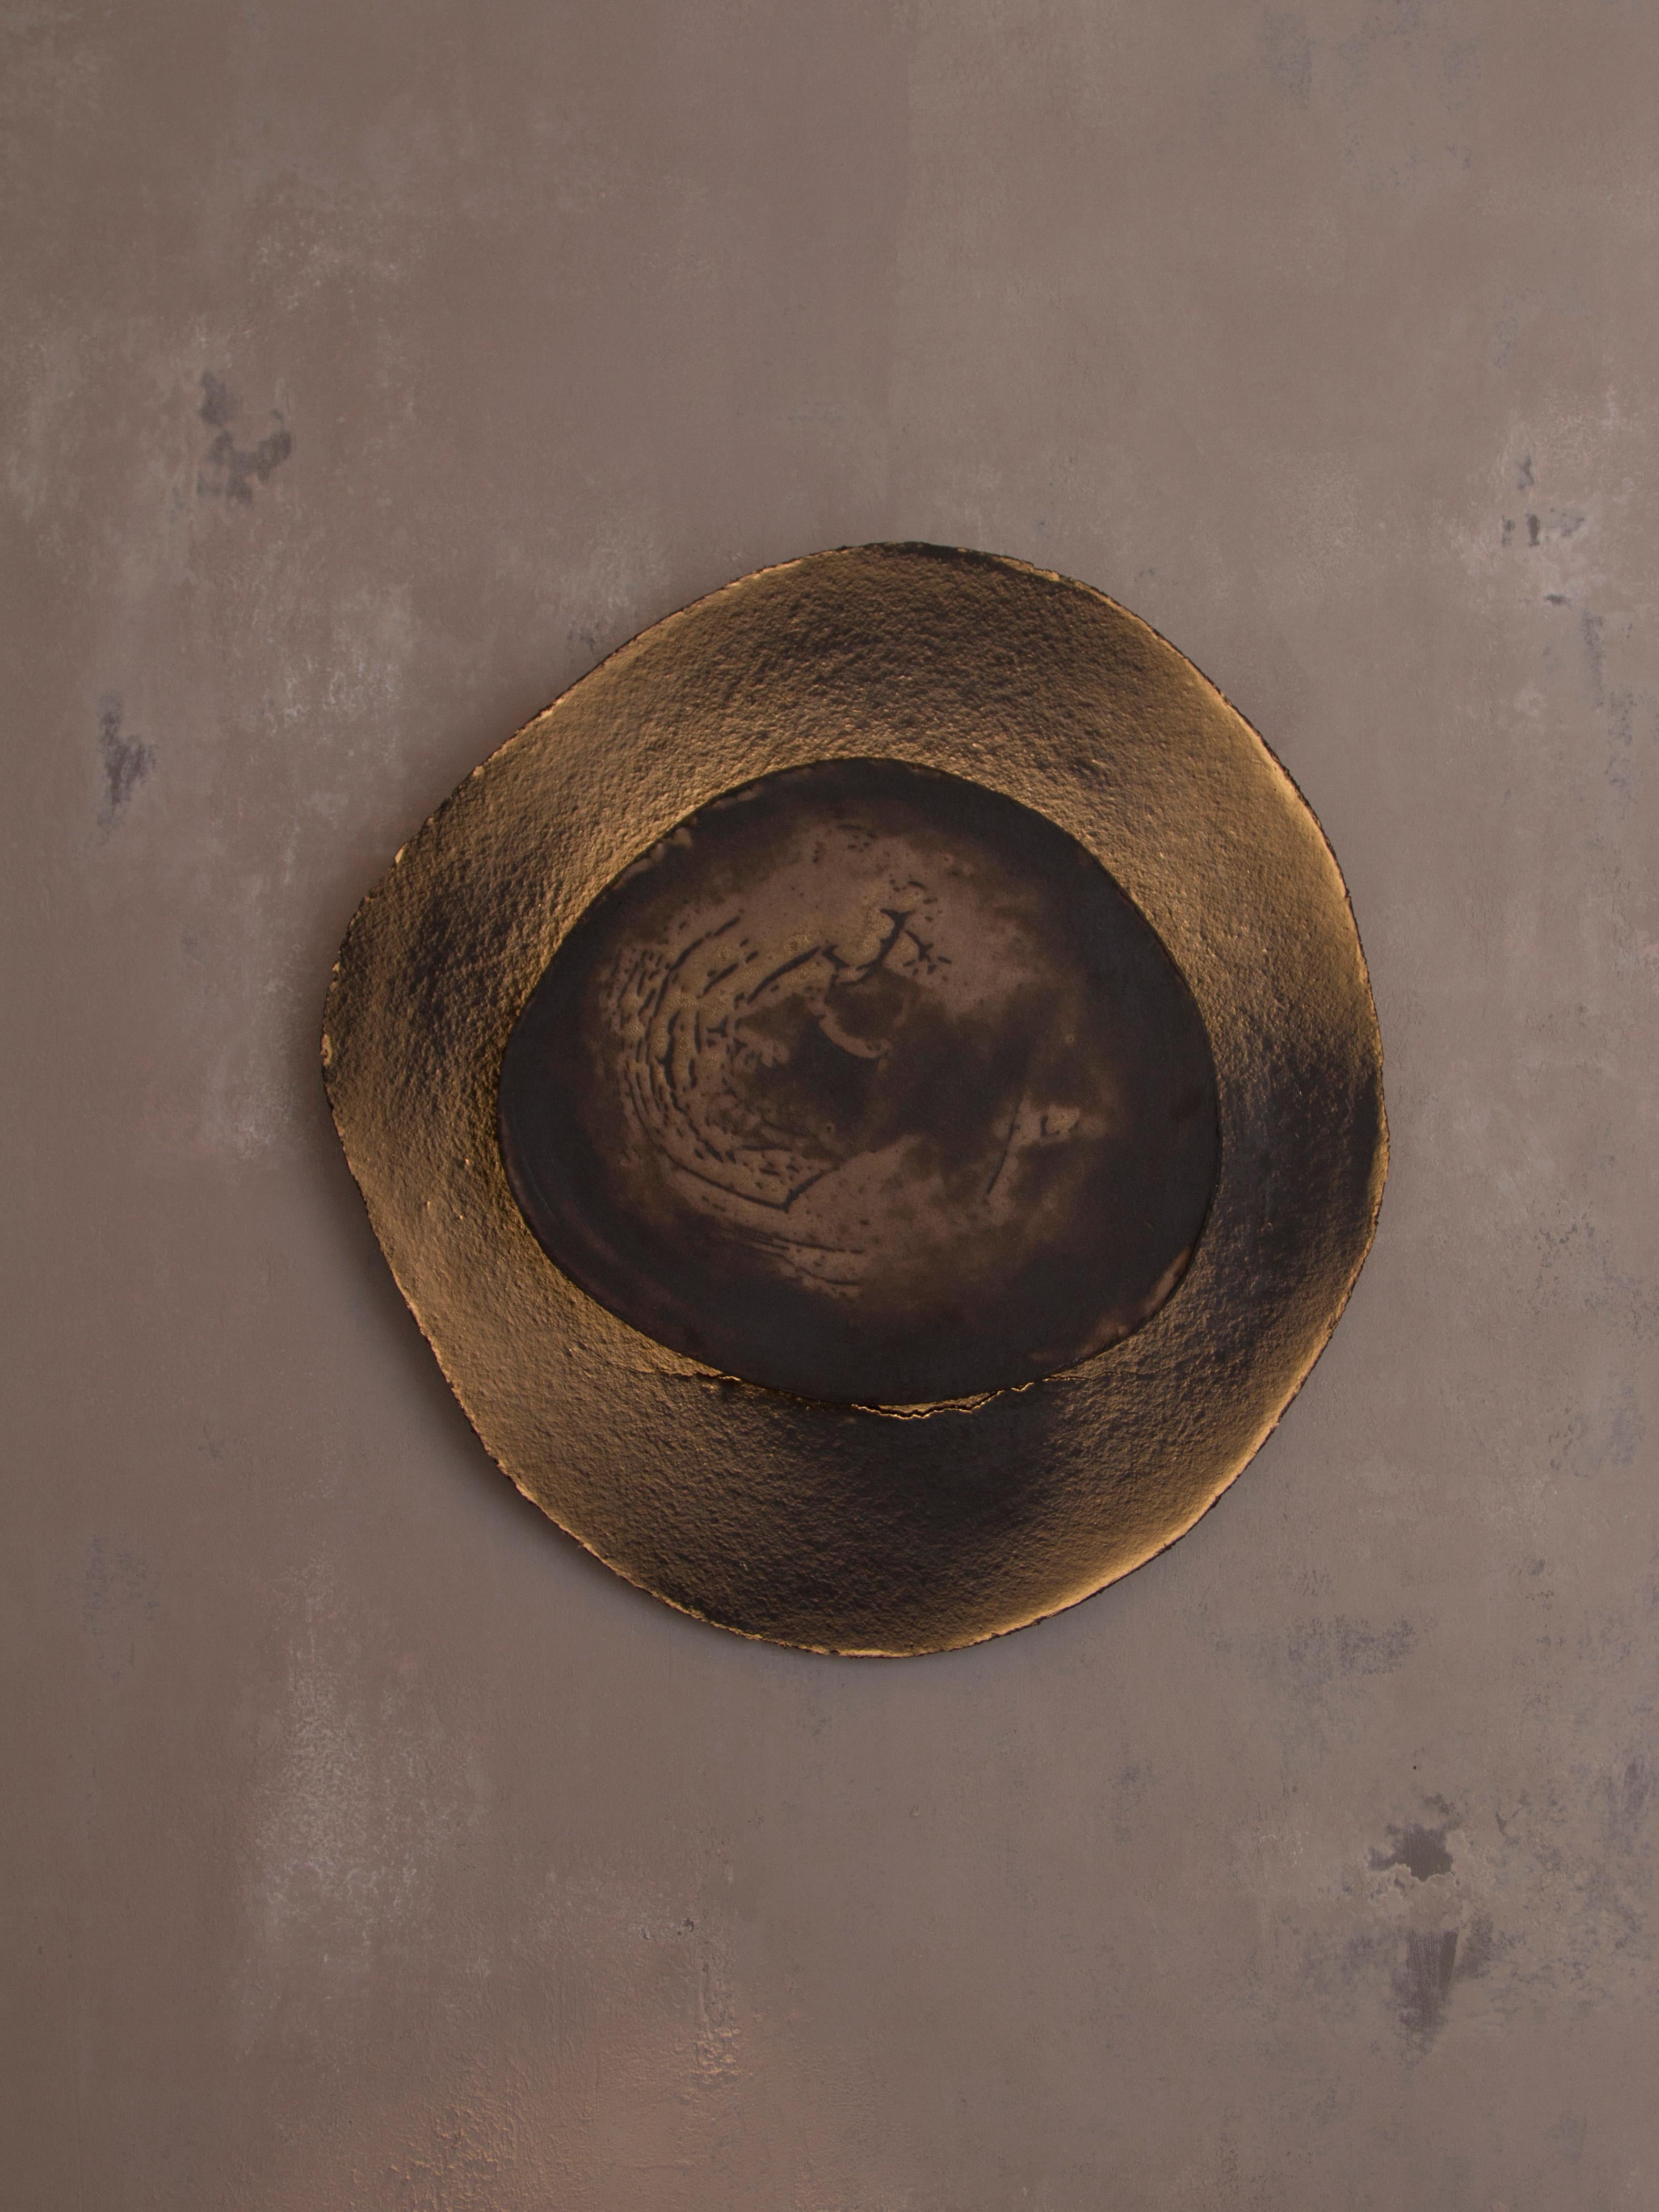 Ash #7 wall light by Margaux Leycuras
One of a Kind, Signed and numbered
Dimensions: D 6 x W 56 x H 54 cm 
Material: Ceramic, black stoneware with patinated gold enamel.
The piece is signed, numbered and delivered with a certificate of